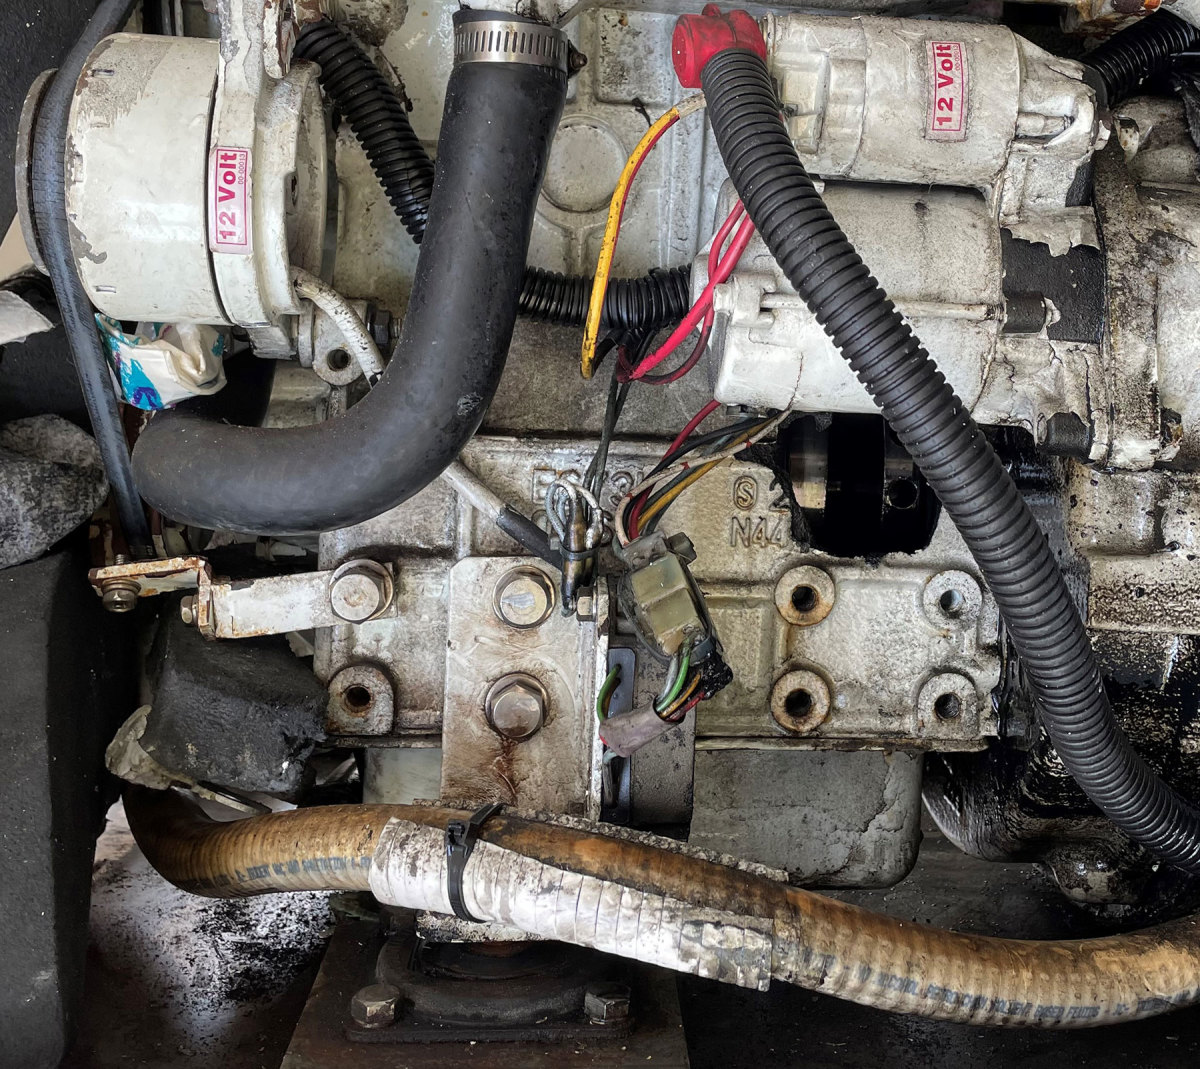 This generator met an early demise. Perpetual low oil and a bypassed alarm system starved bearings, causing a broken connecting rod to break a hole in the block.